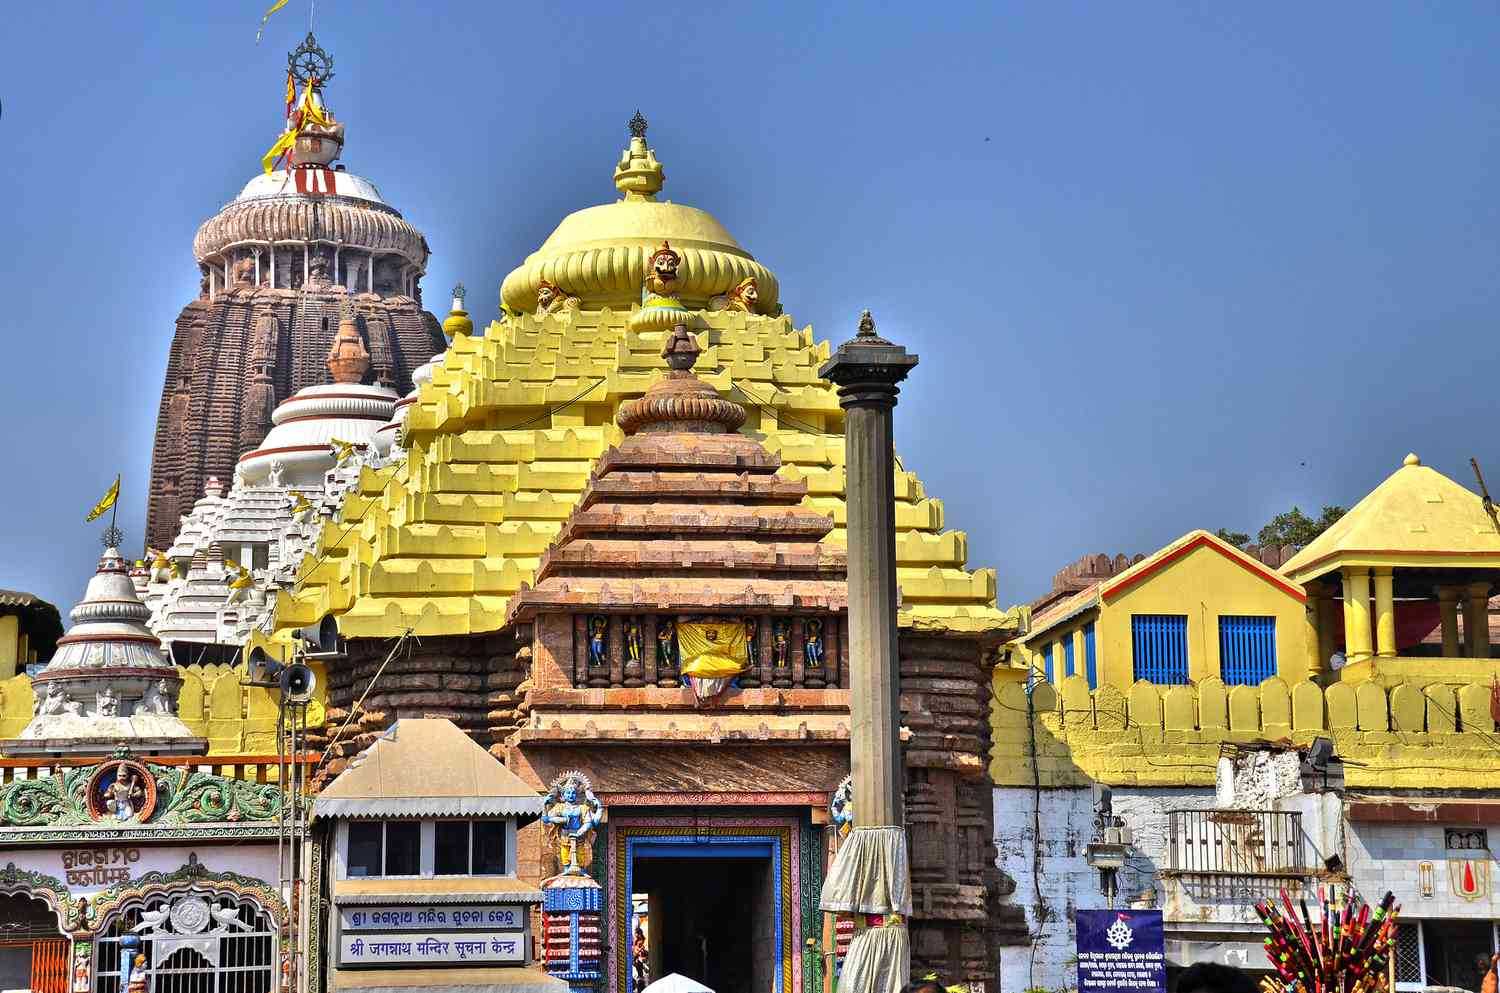 Chief Minister Naveen Patnaik formally opened the Jagannath Temple project.f the Rs. 800 crore historic corridor surrounding the Jagannath temple and Srimandir Parikrama.